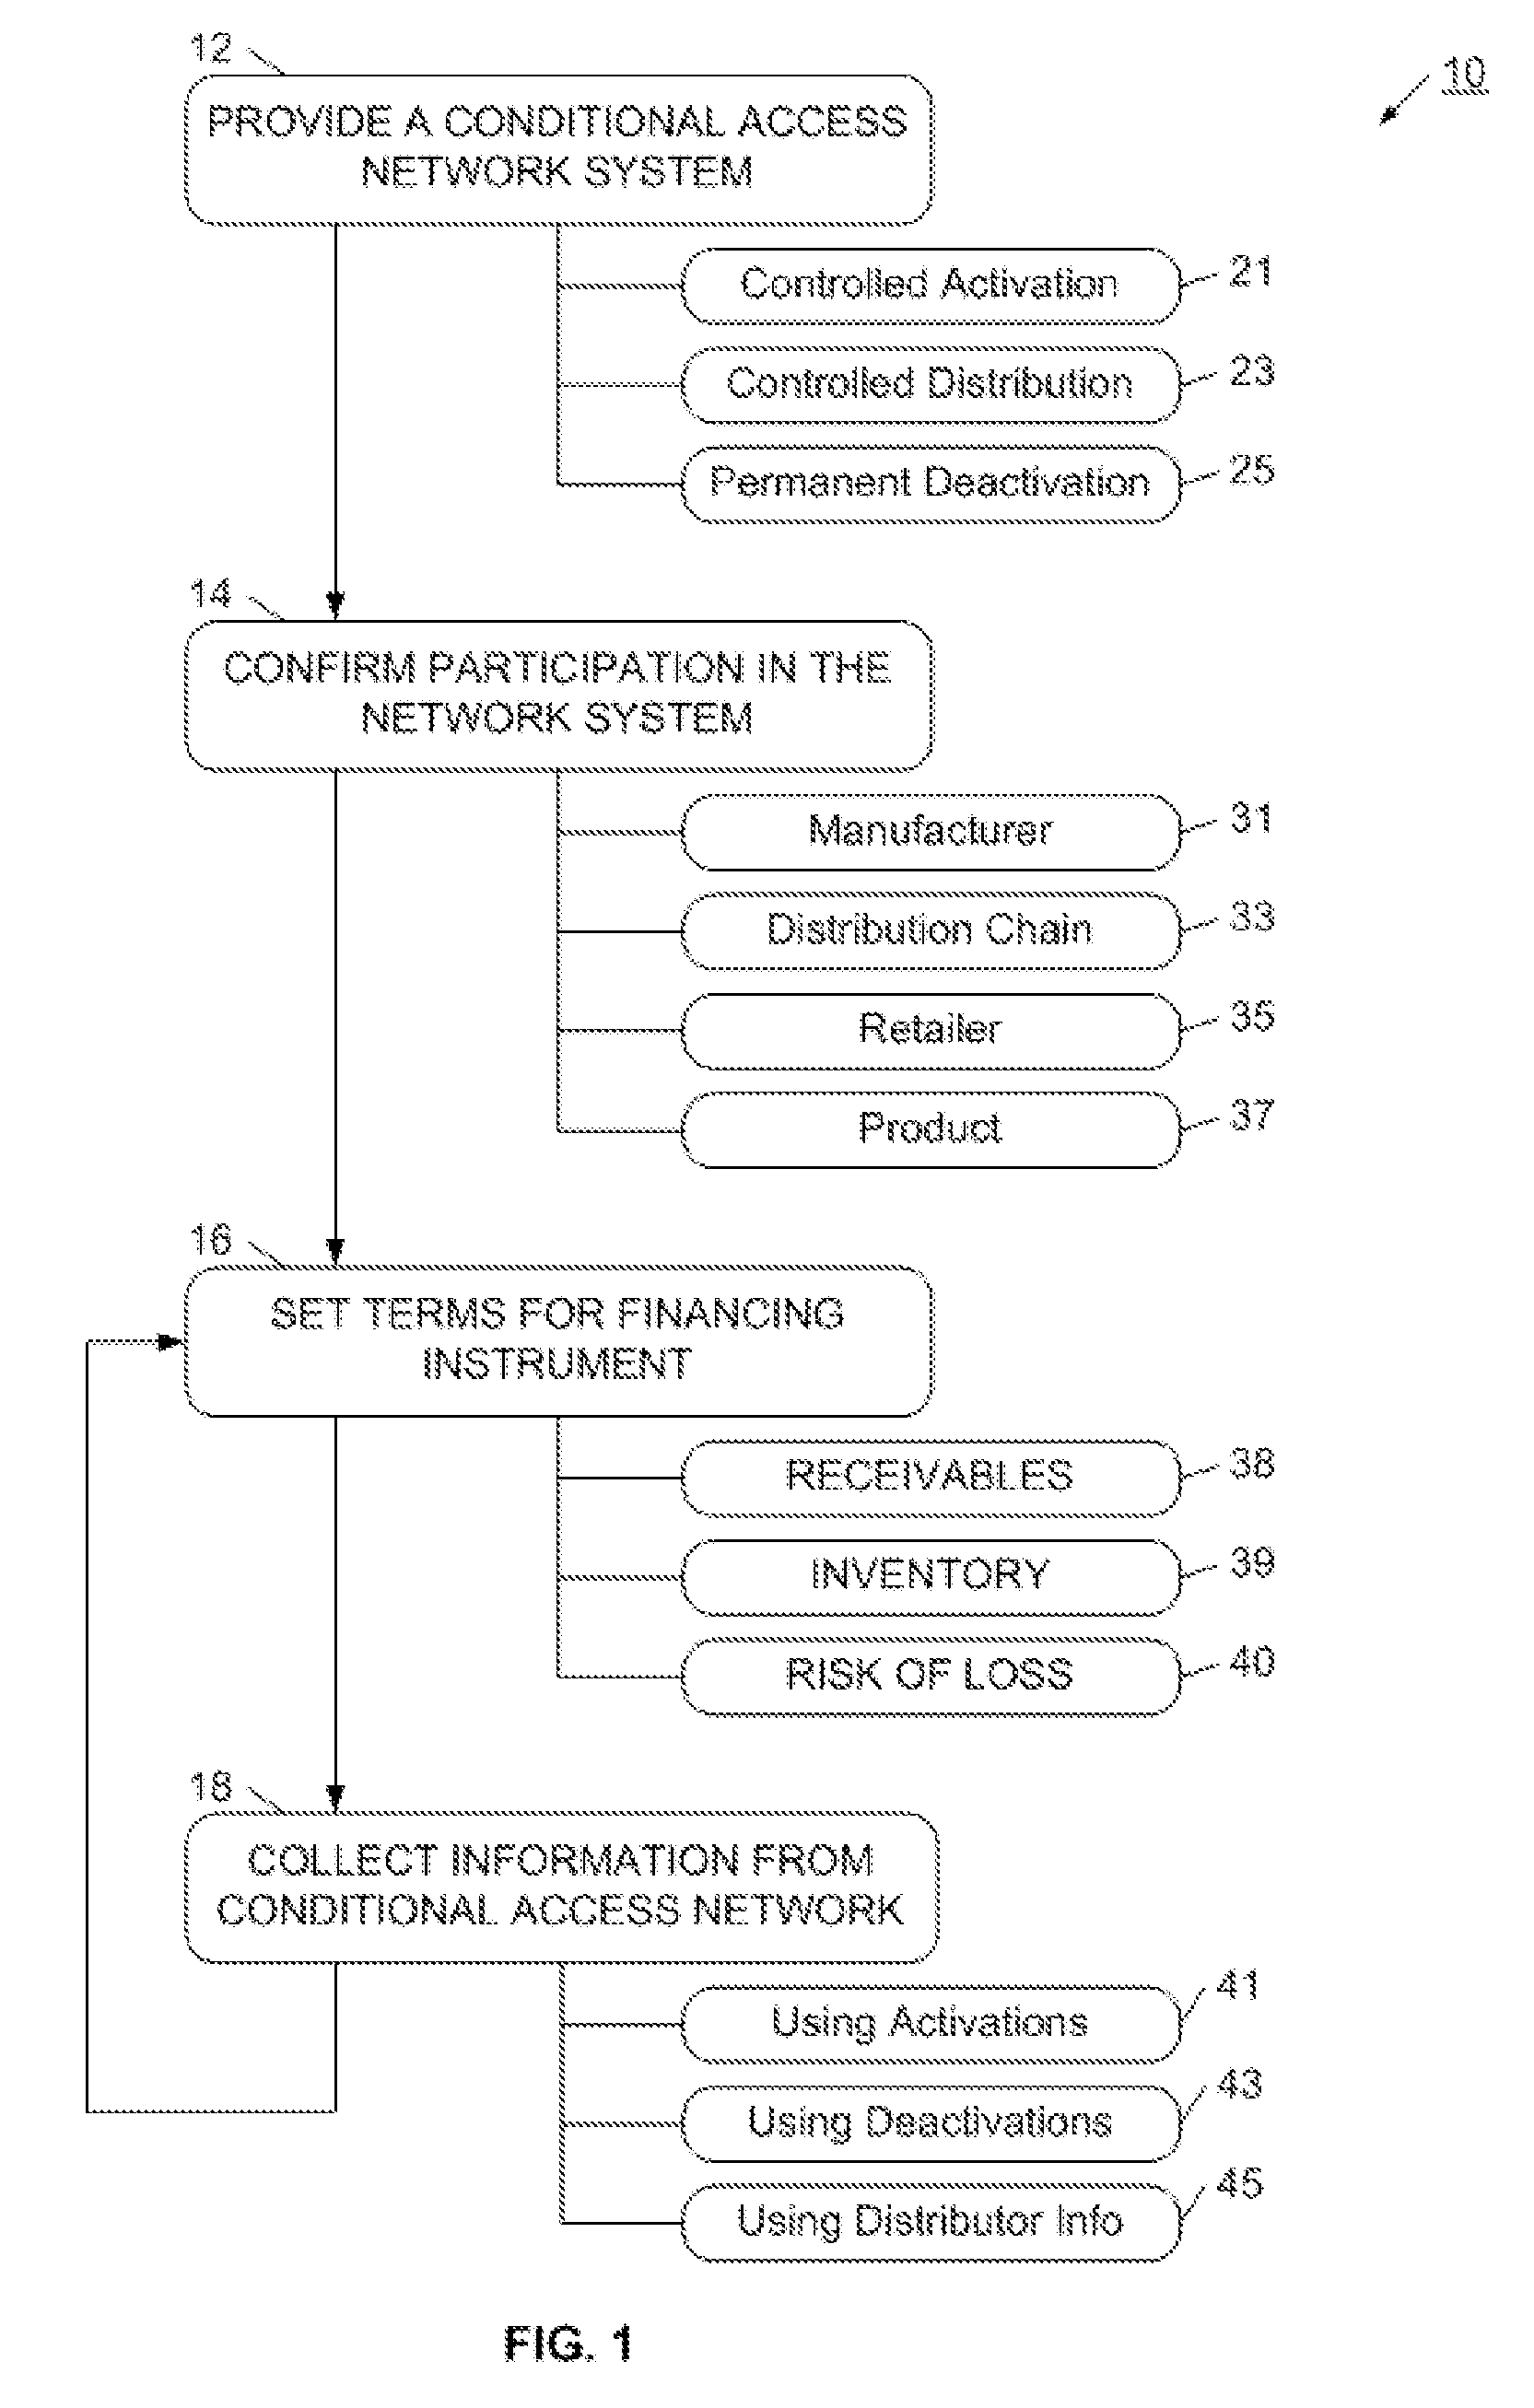 System and process for providing loans or other financing instruments